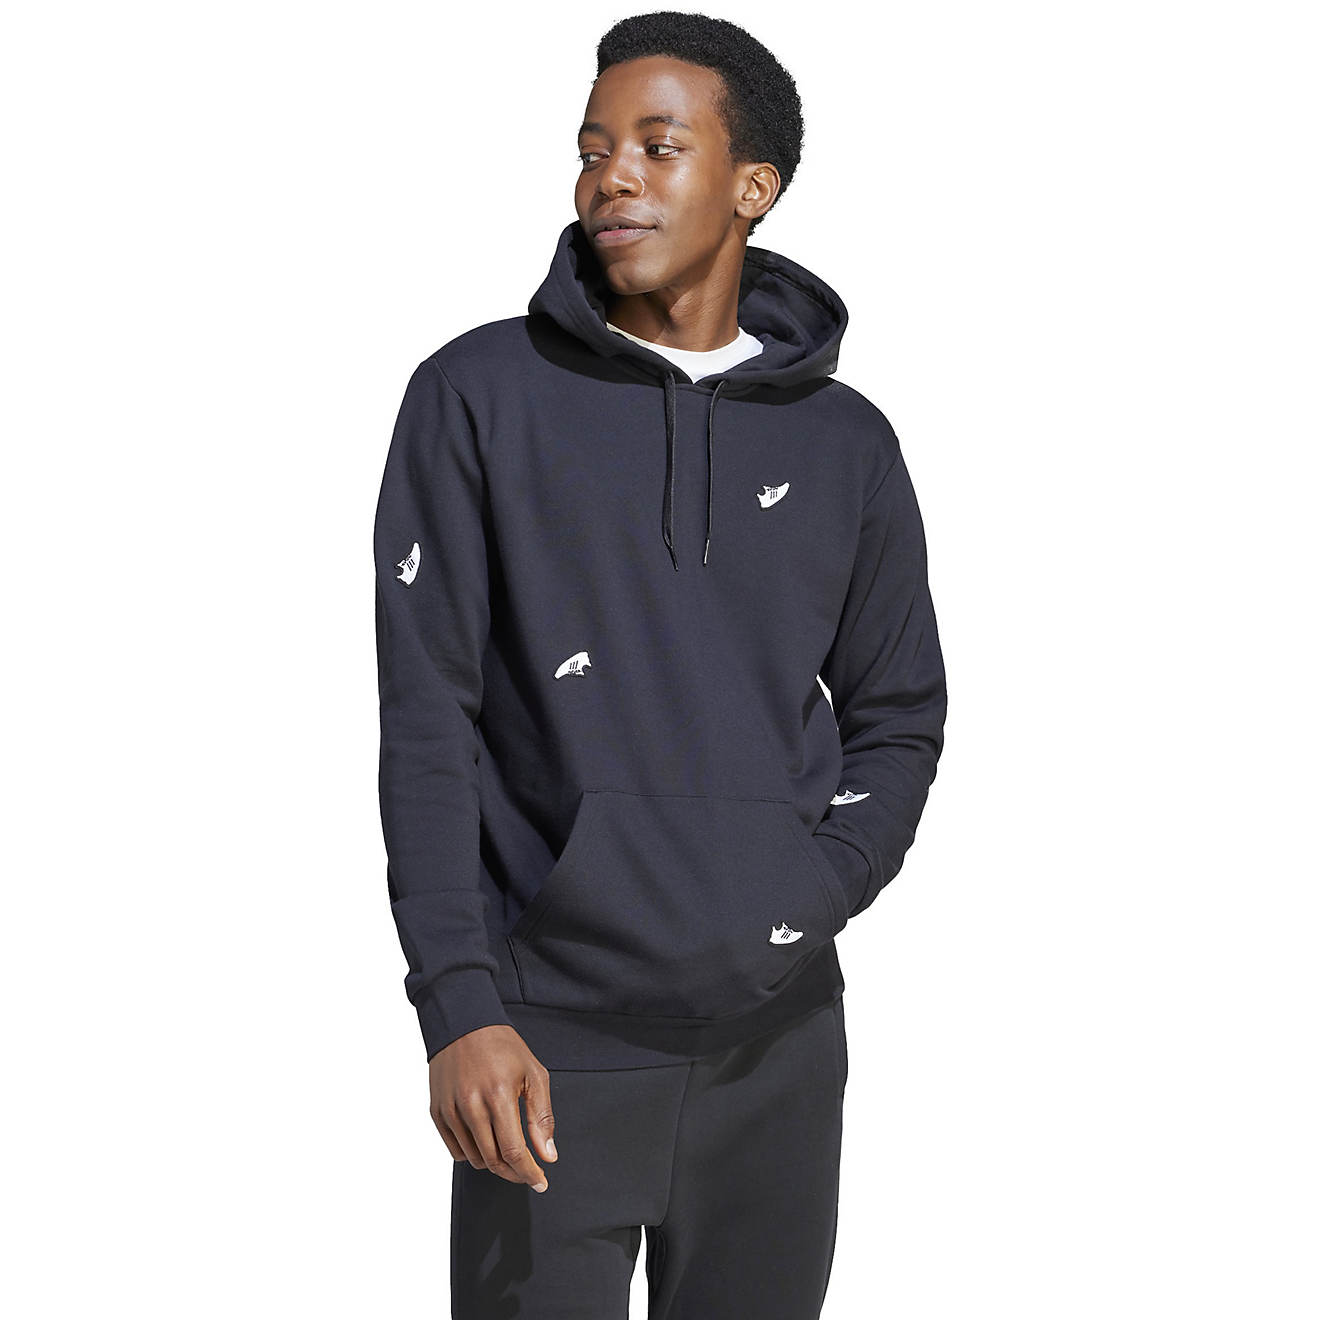 adidas Men's Undeniable Graphic Hoodie | Free Shipping at Academy